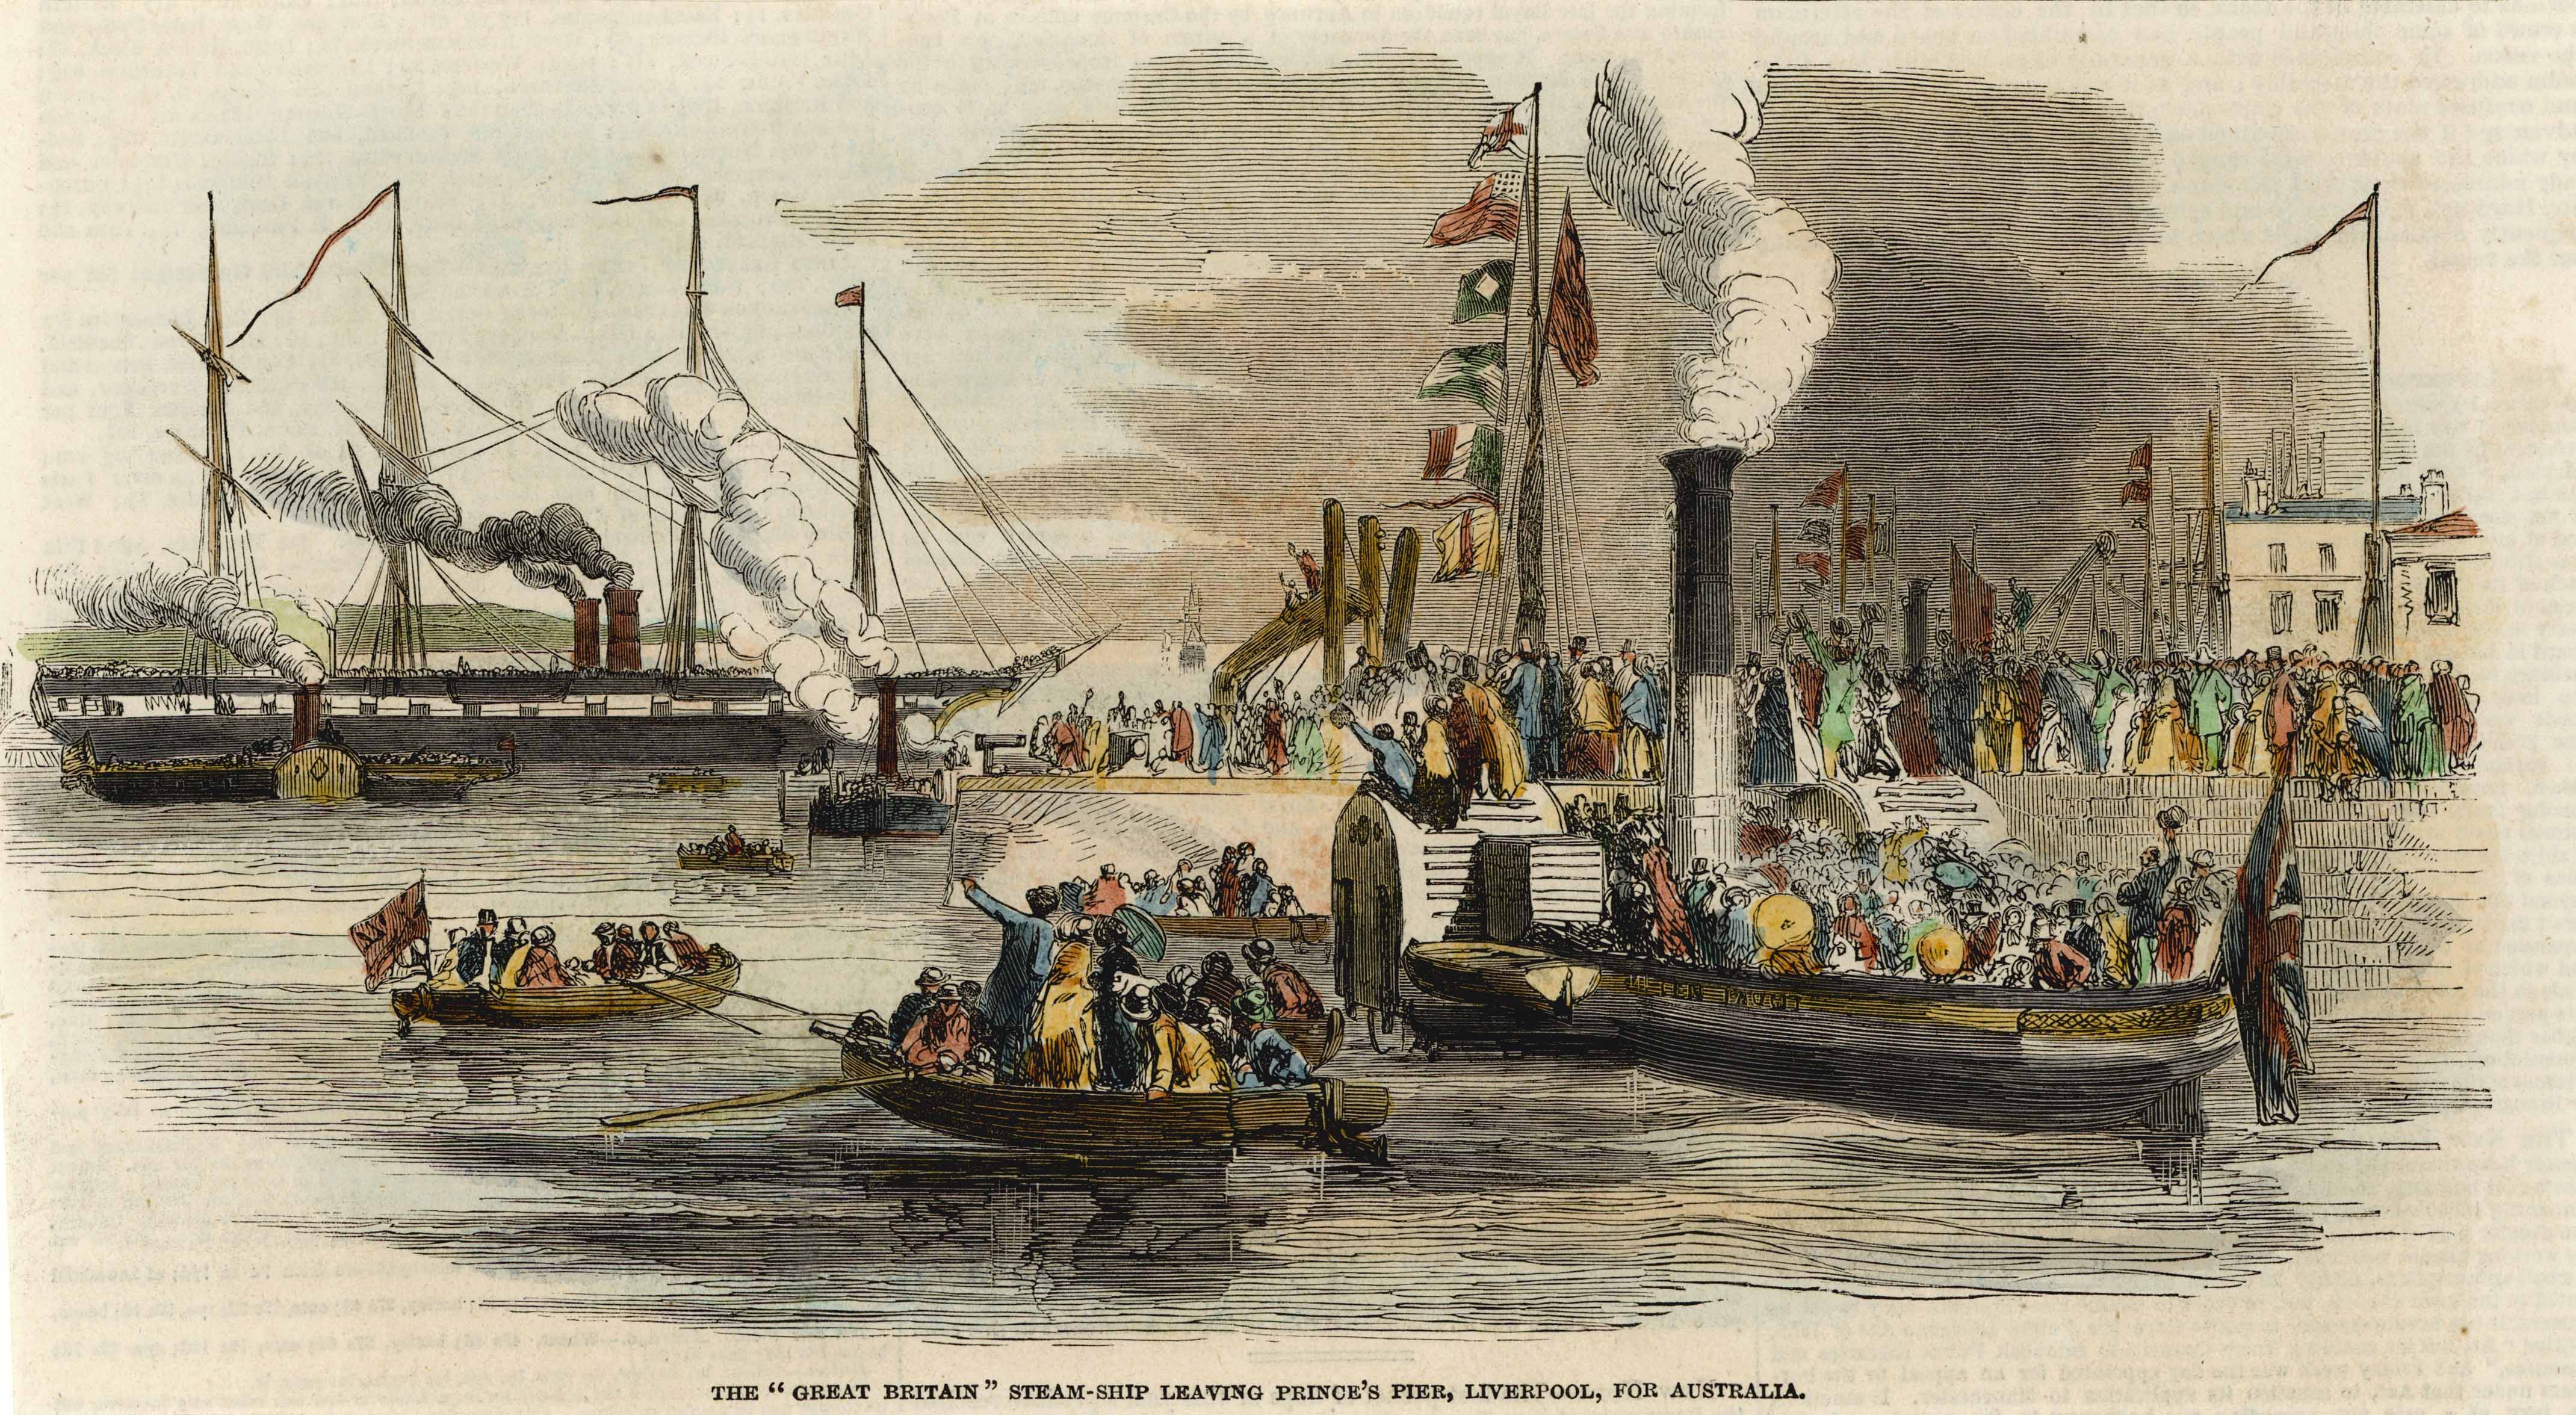 SS Great Britain leaving Prince’s Pier, Liverpool, for Australia, 1852